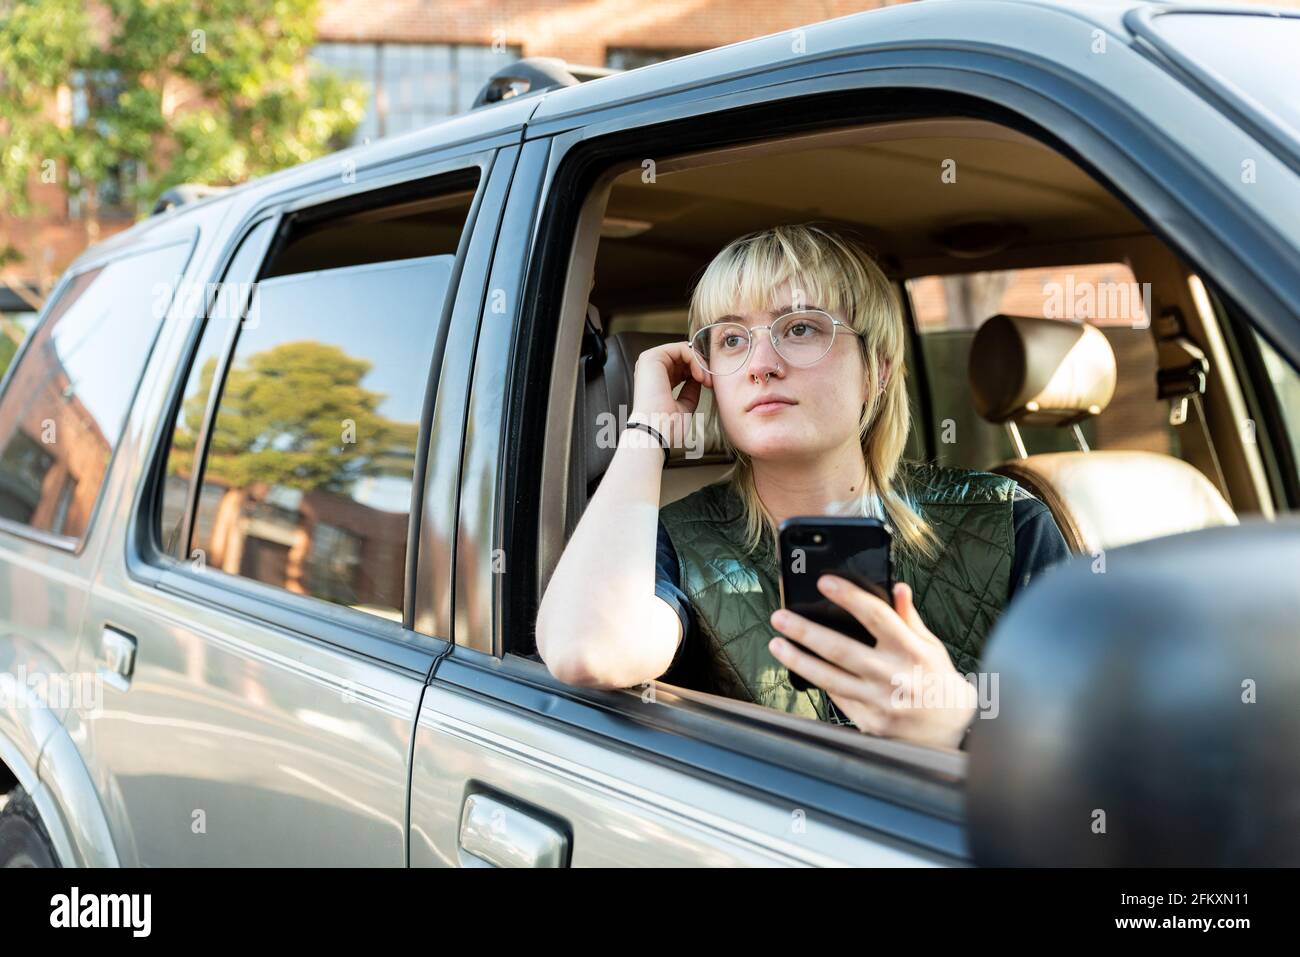 Teen looking out passenger window of car holding cel phone downtown Stock Photo